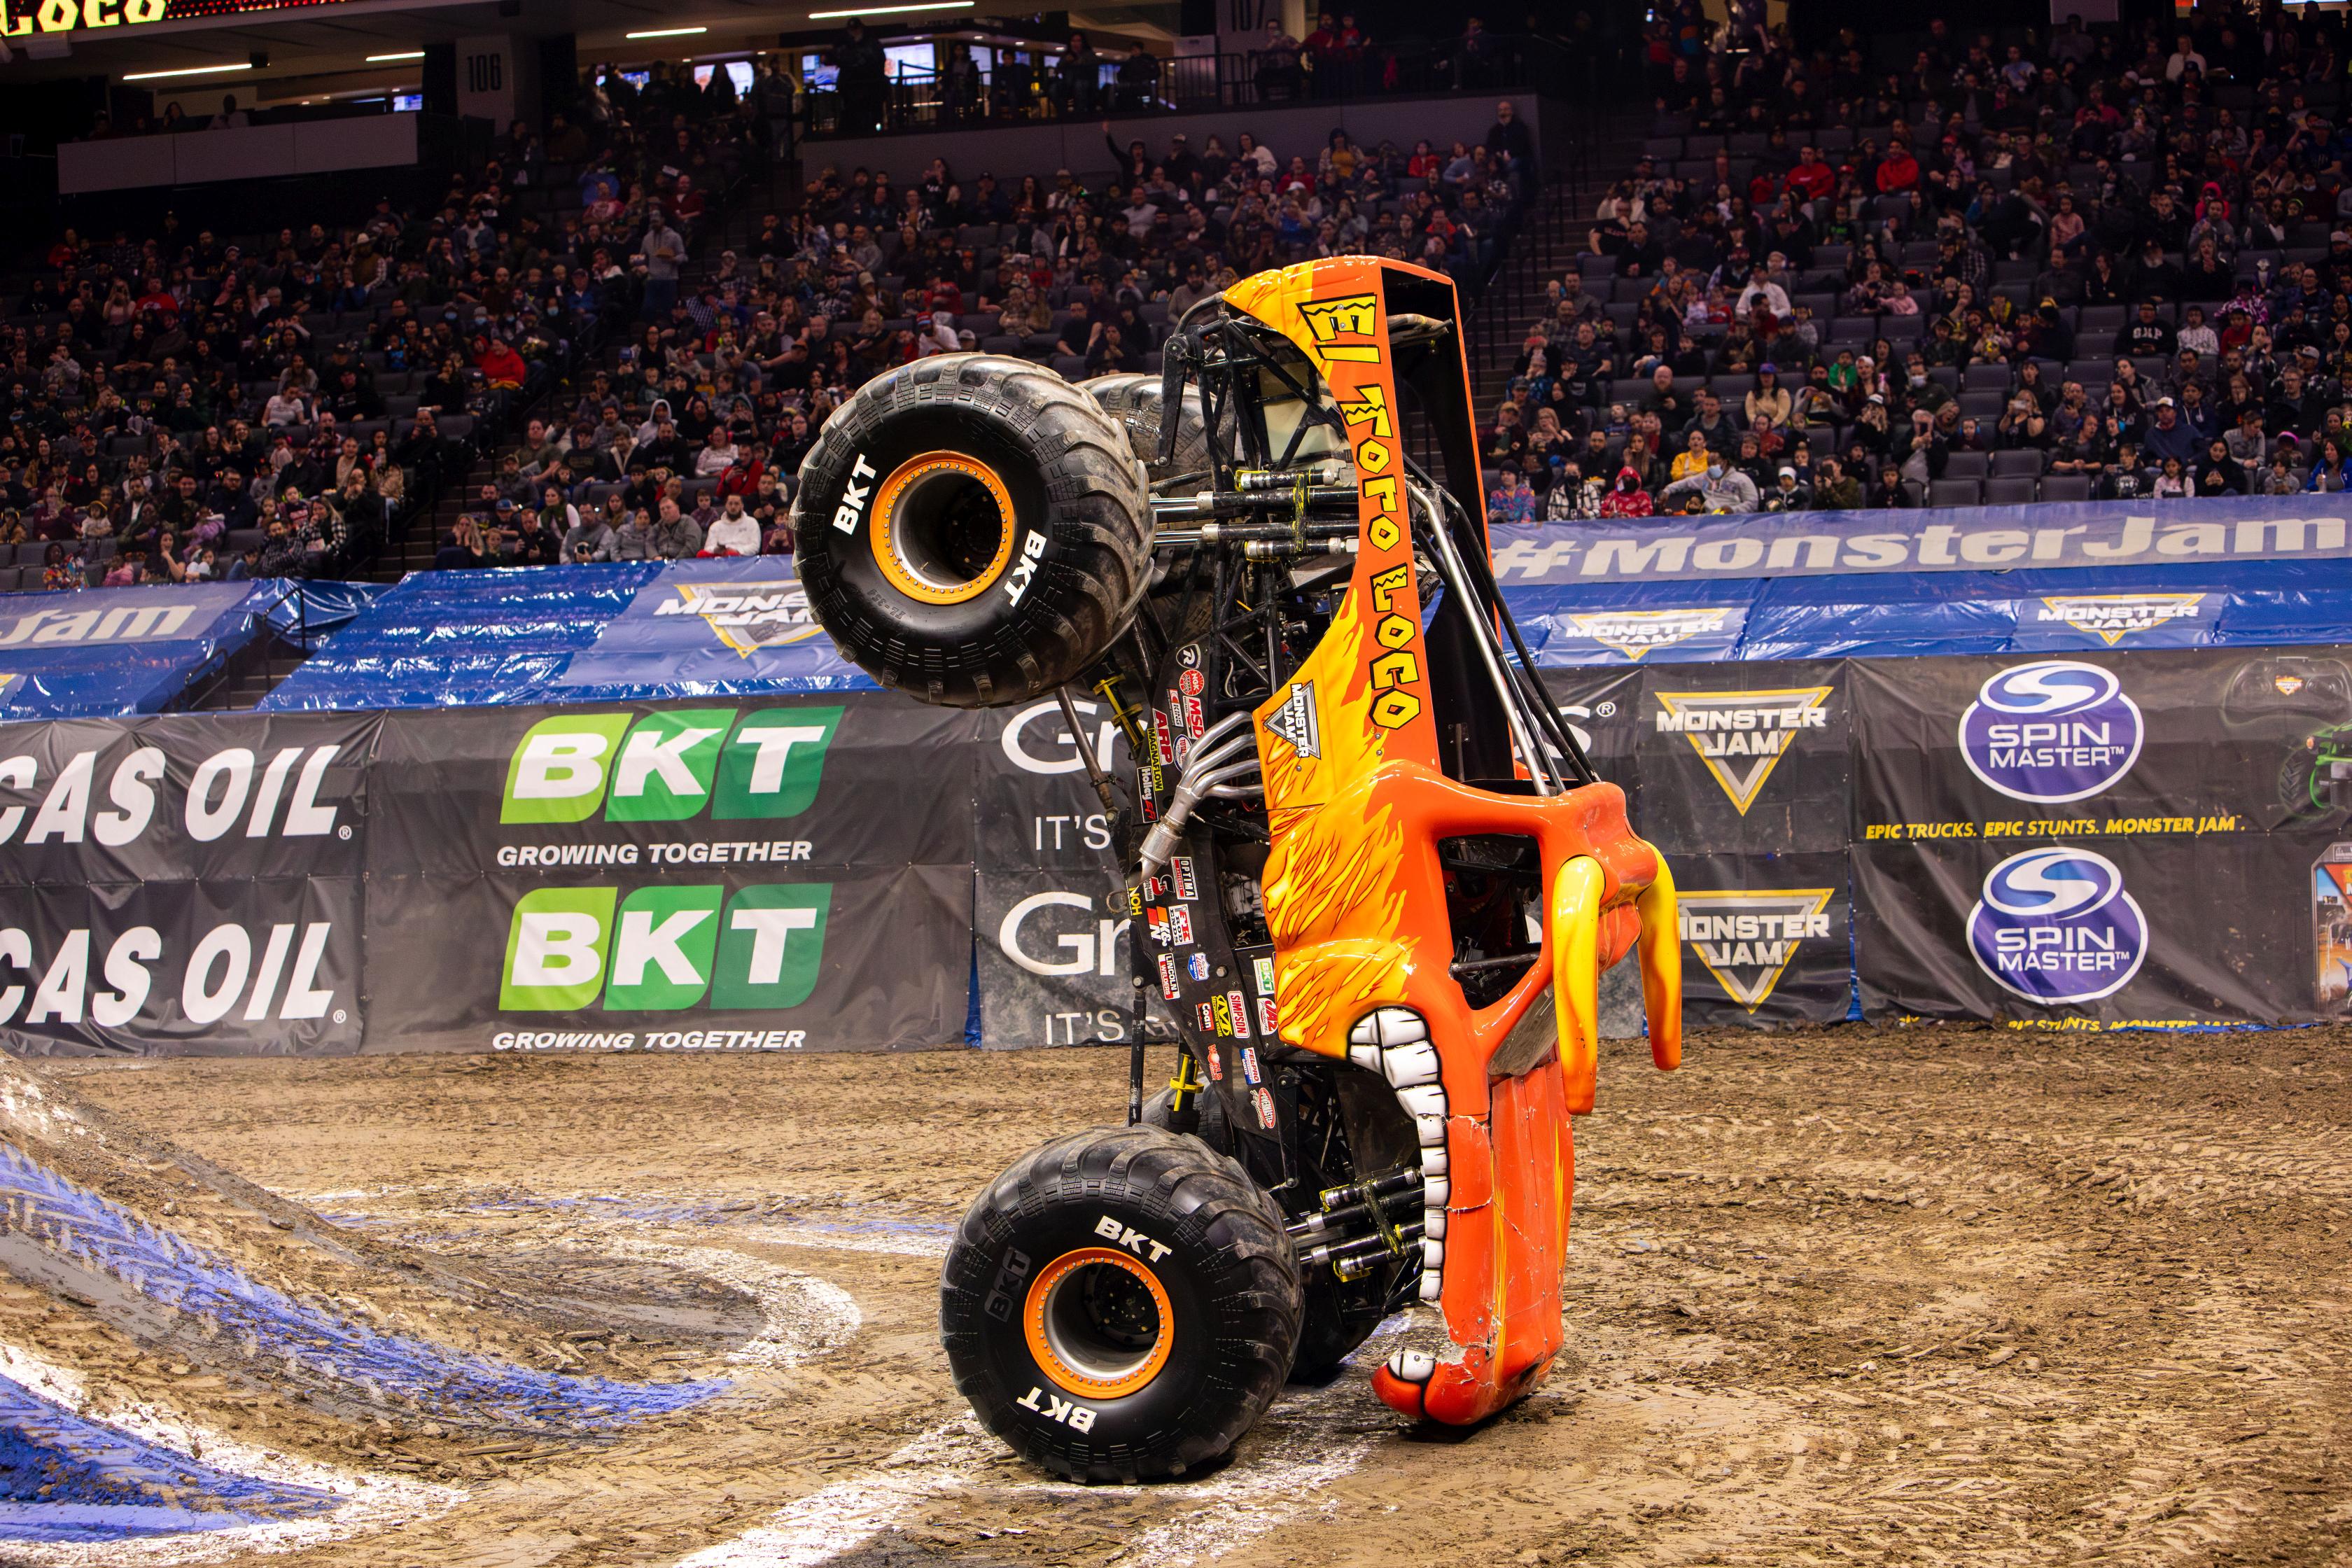 Monster Jam live event returns to Anaheim in Angels Stadium after